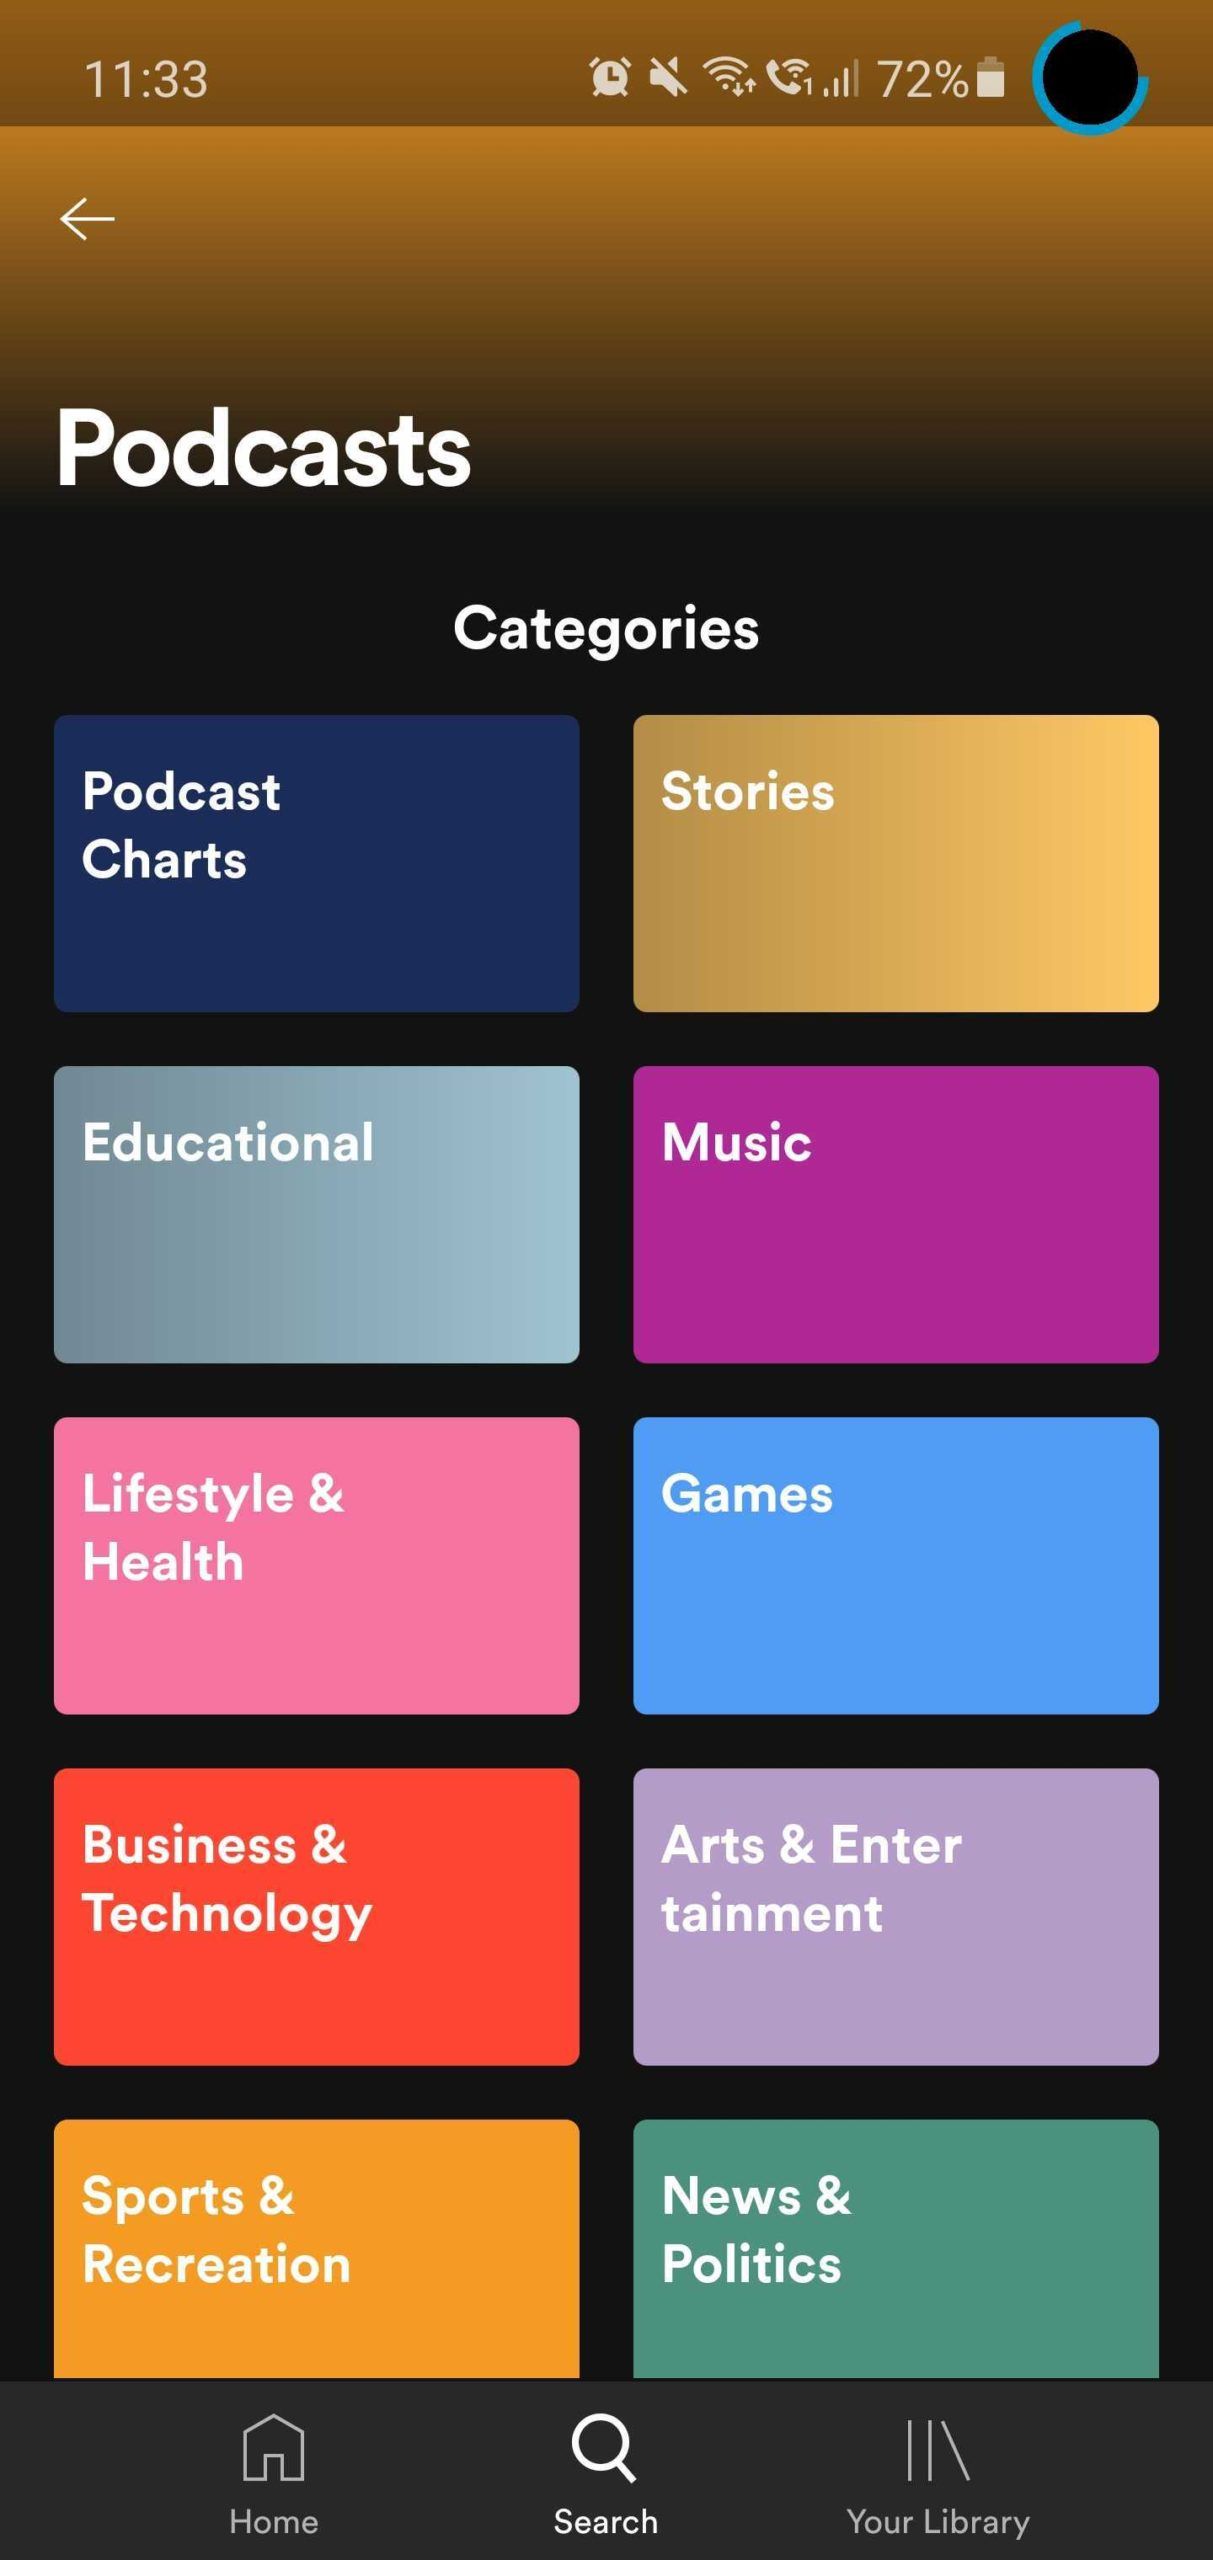 The podcast categories in Spotify